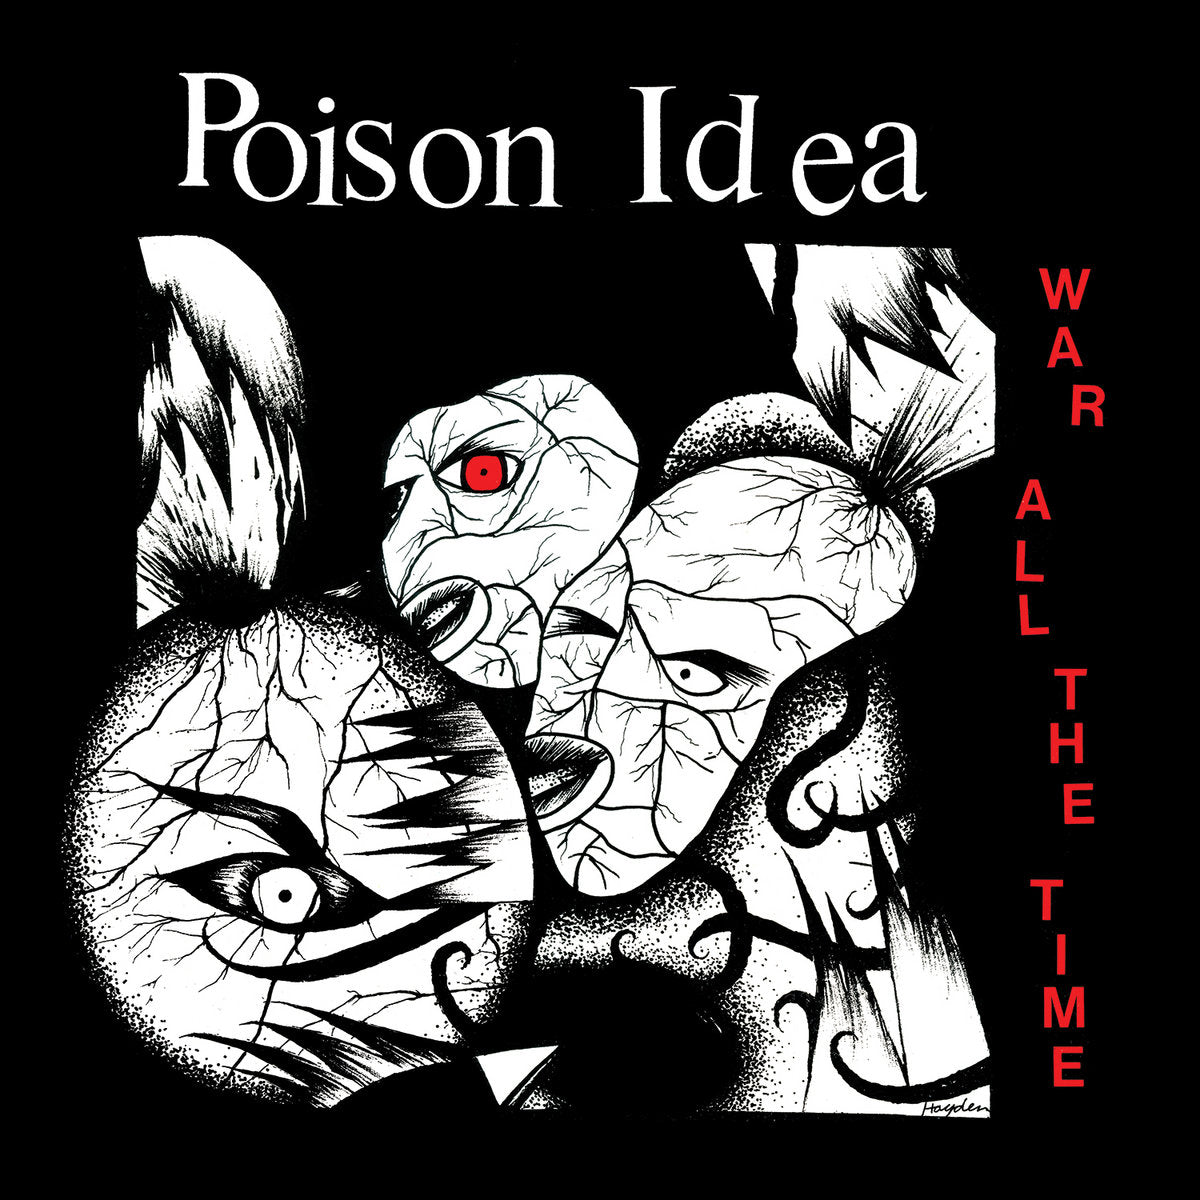 Poison Idea "War All The Time" LP (RED Vinyl)